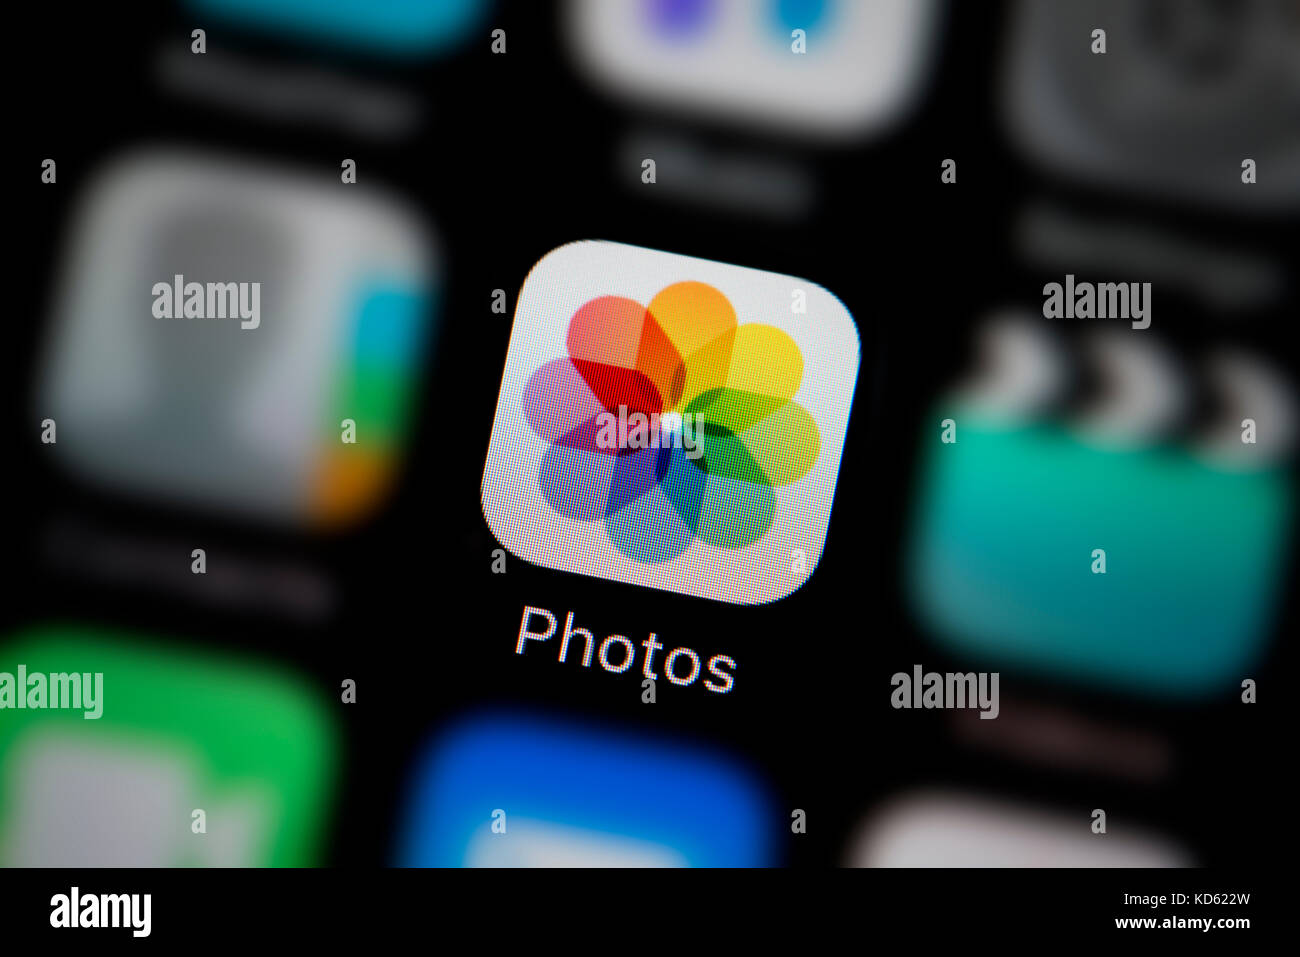 A close-up shot of the Photos app, as seen on the screen of an Apple iPhone (Editorial use only) Stock Photo